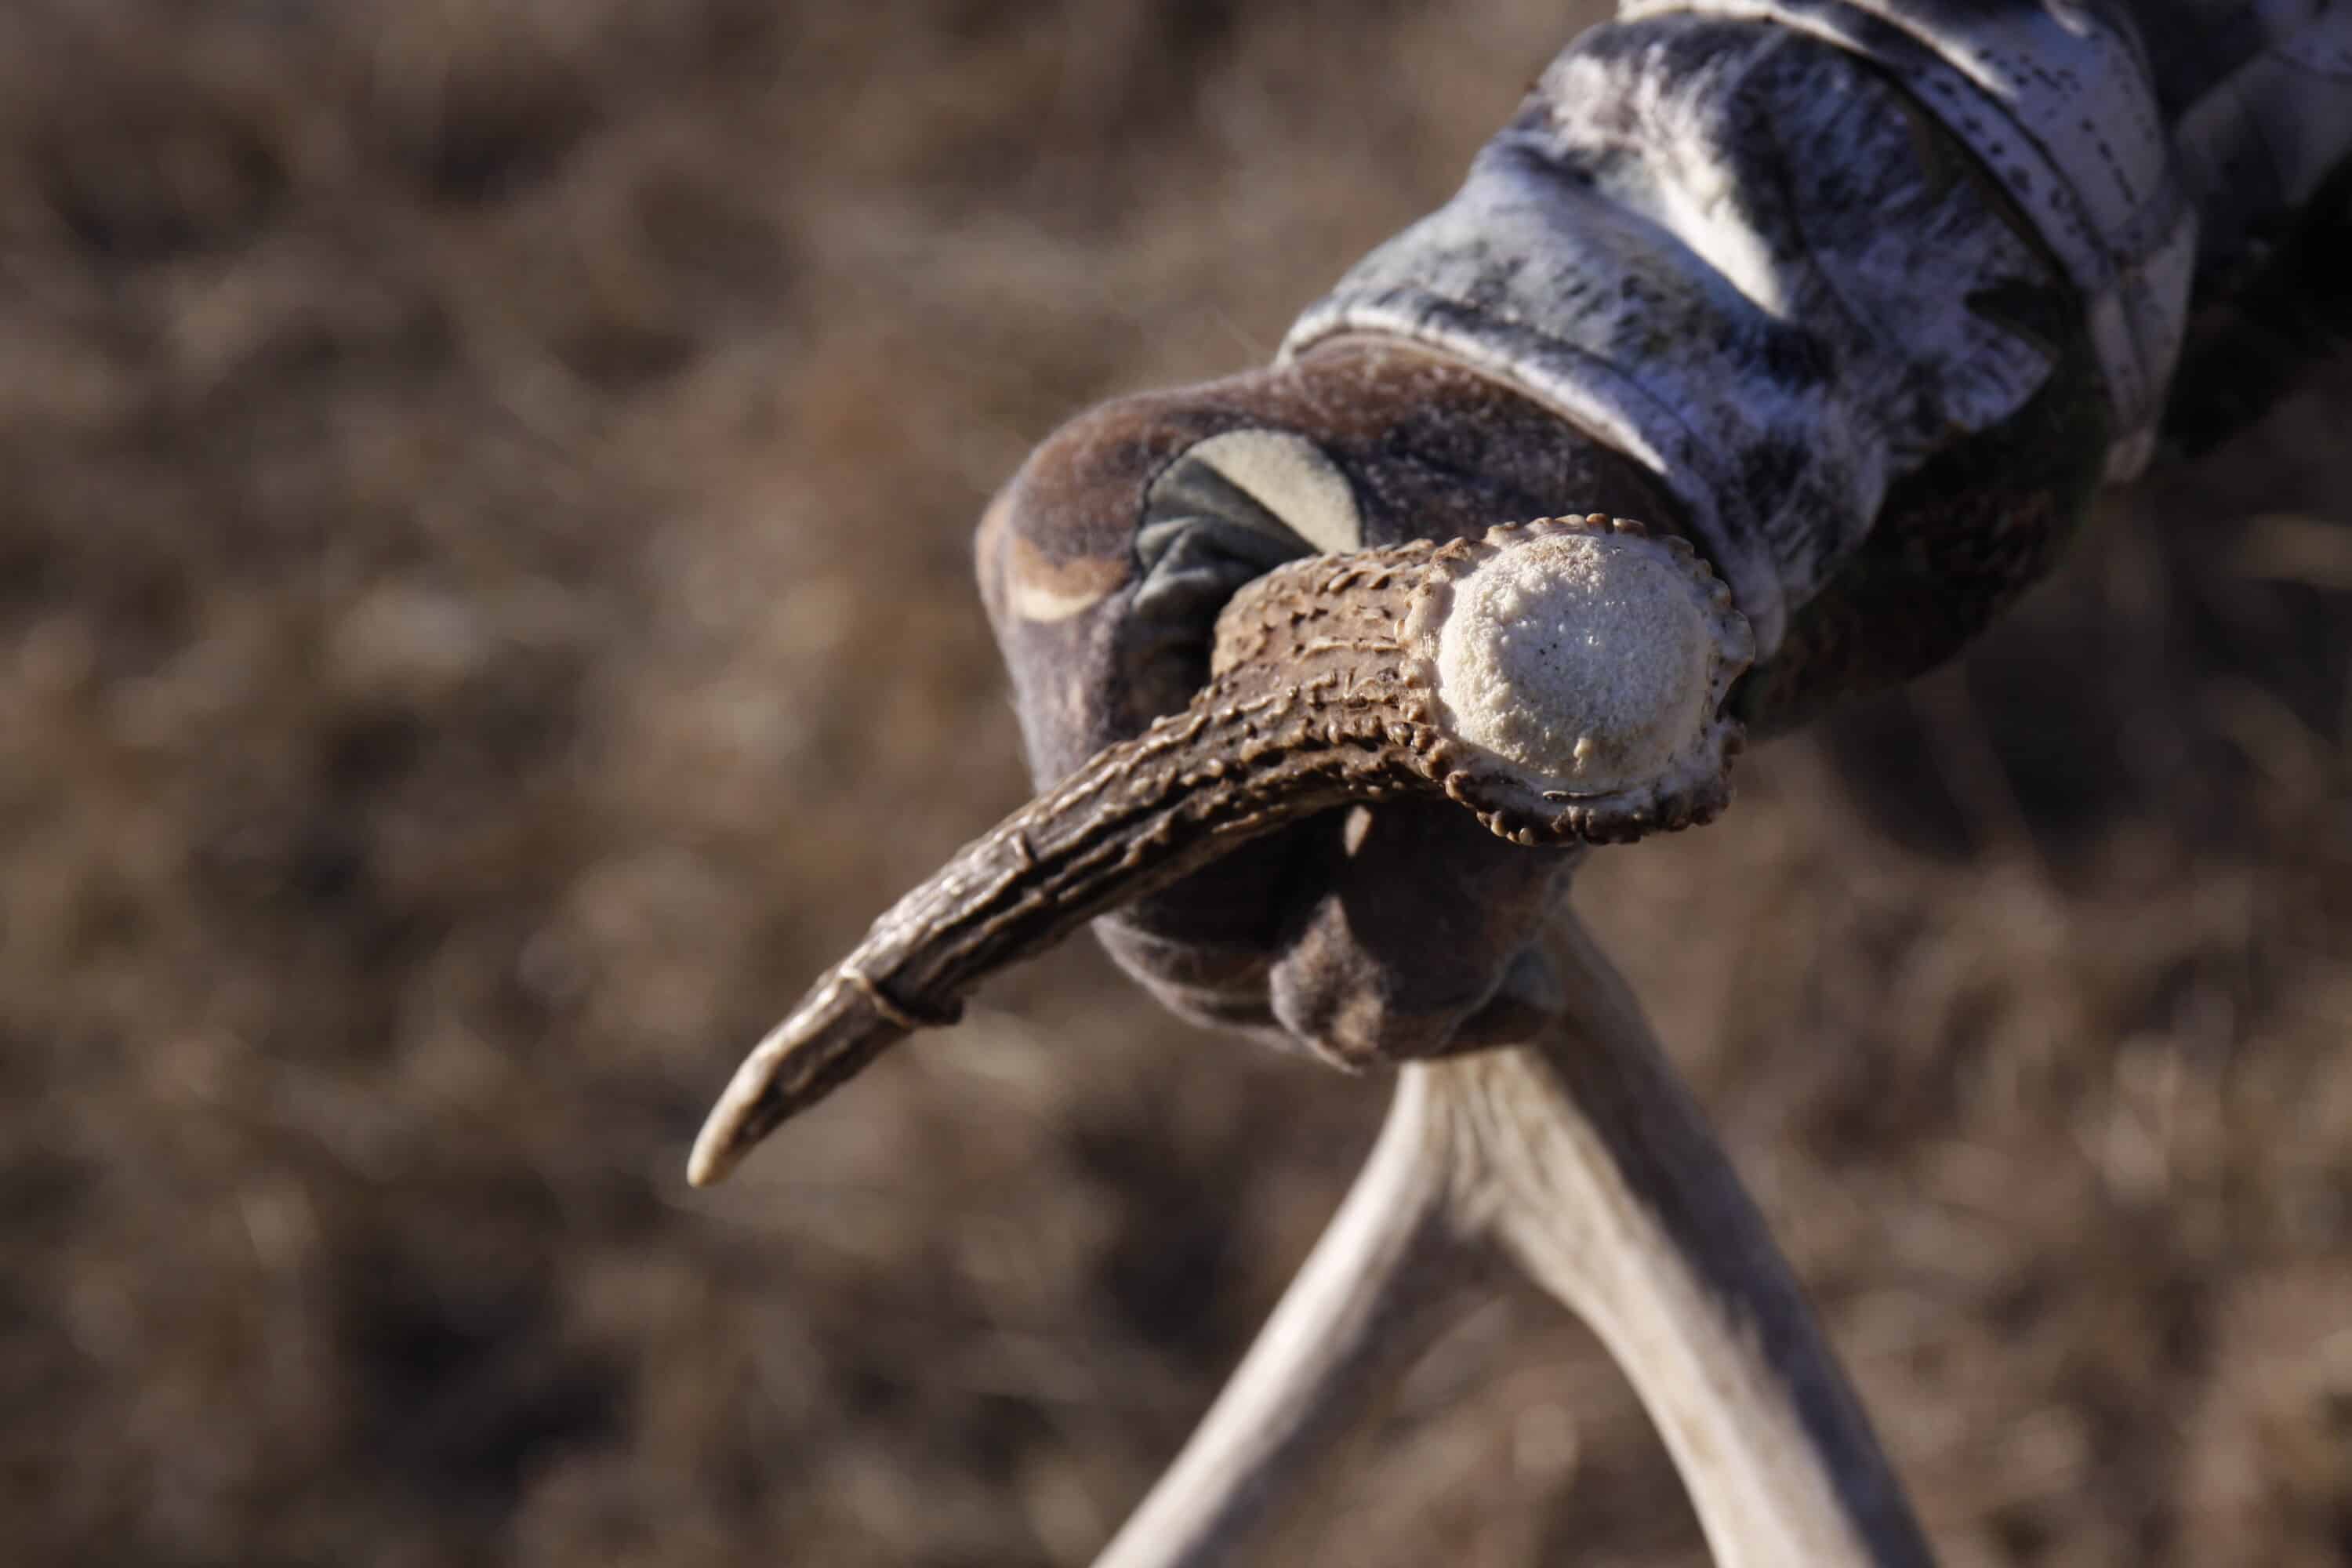 Shed antlers give you added evidence, in addition to trail camera images, to set your hunting season goals.